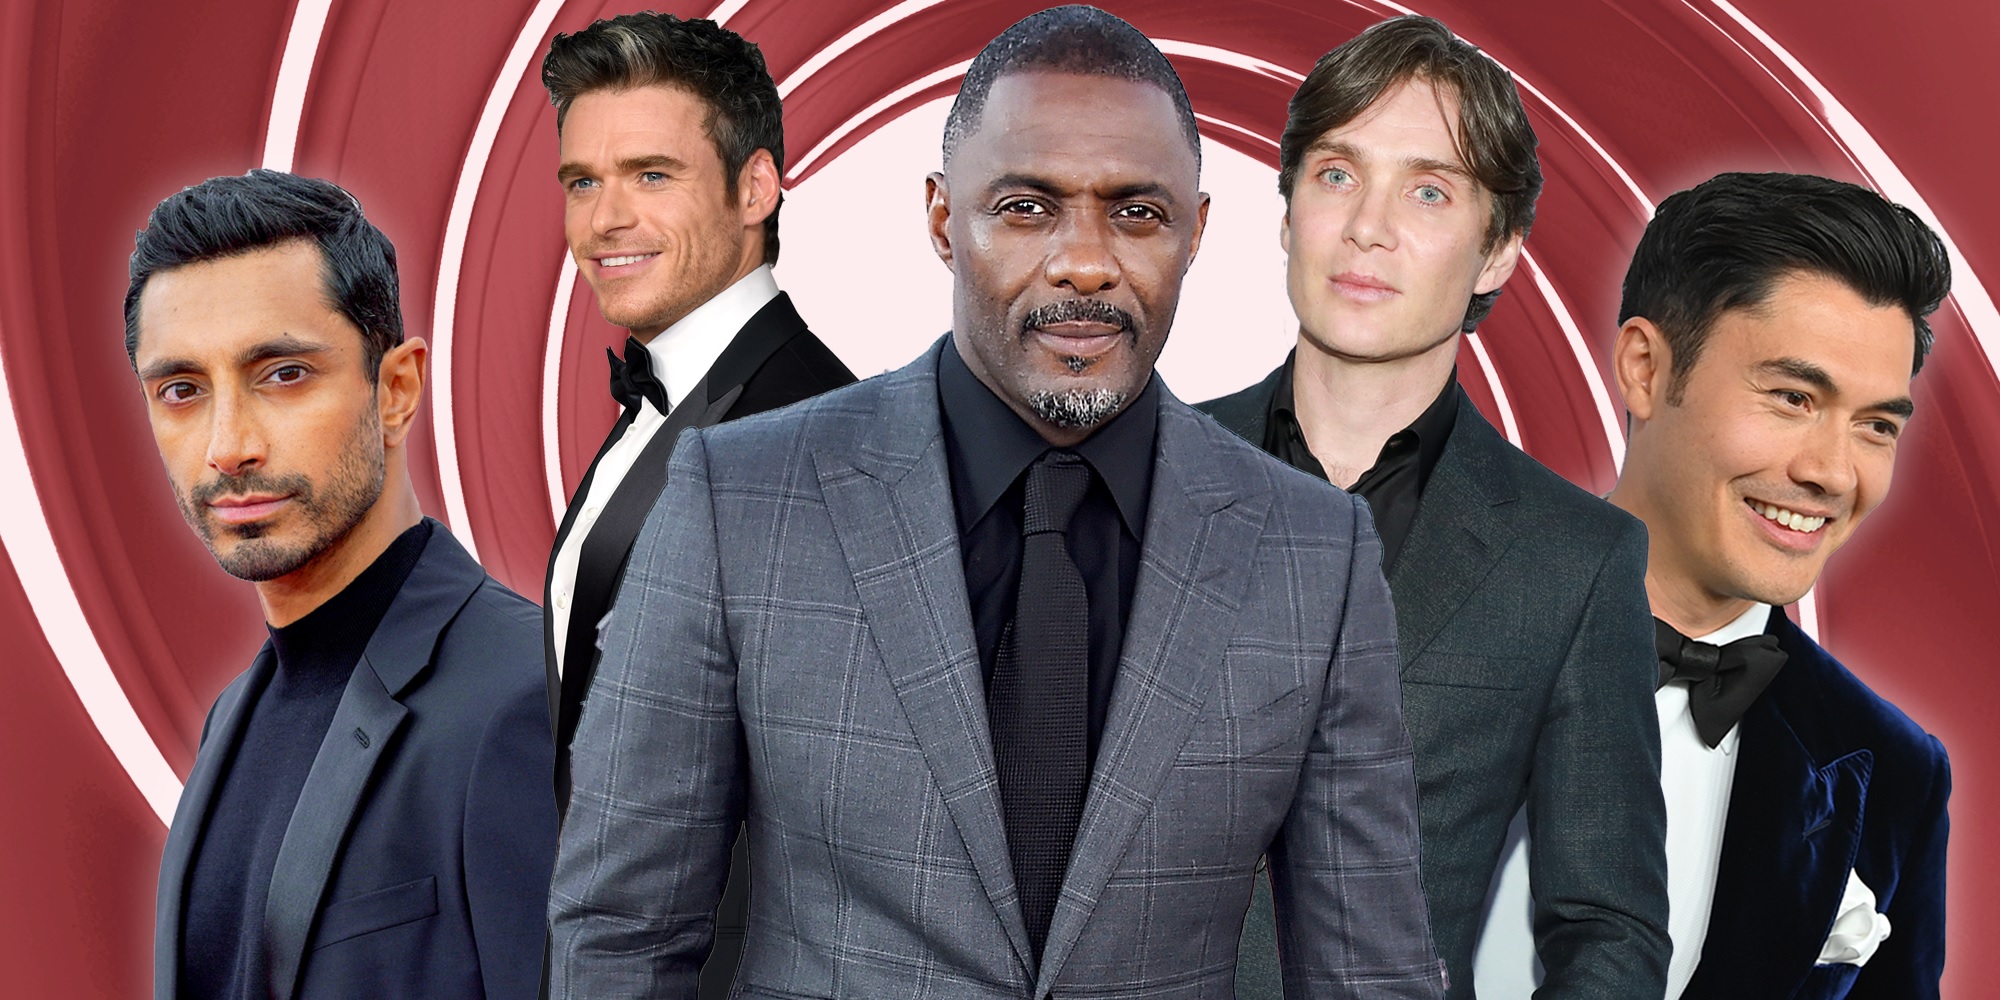 Idris Elba As the next James Bond? Check out opinions of producers, Twitter users